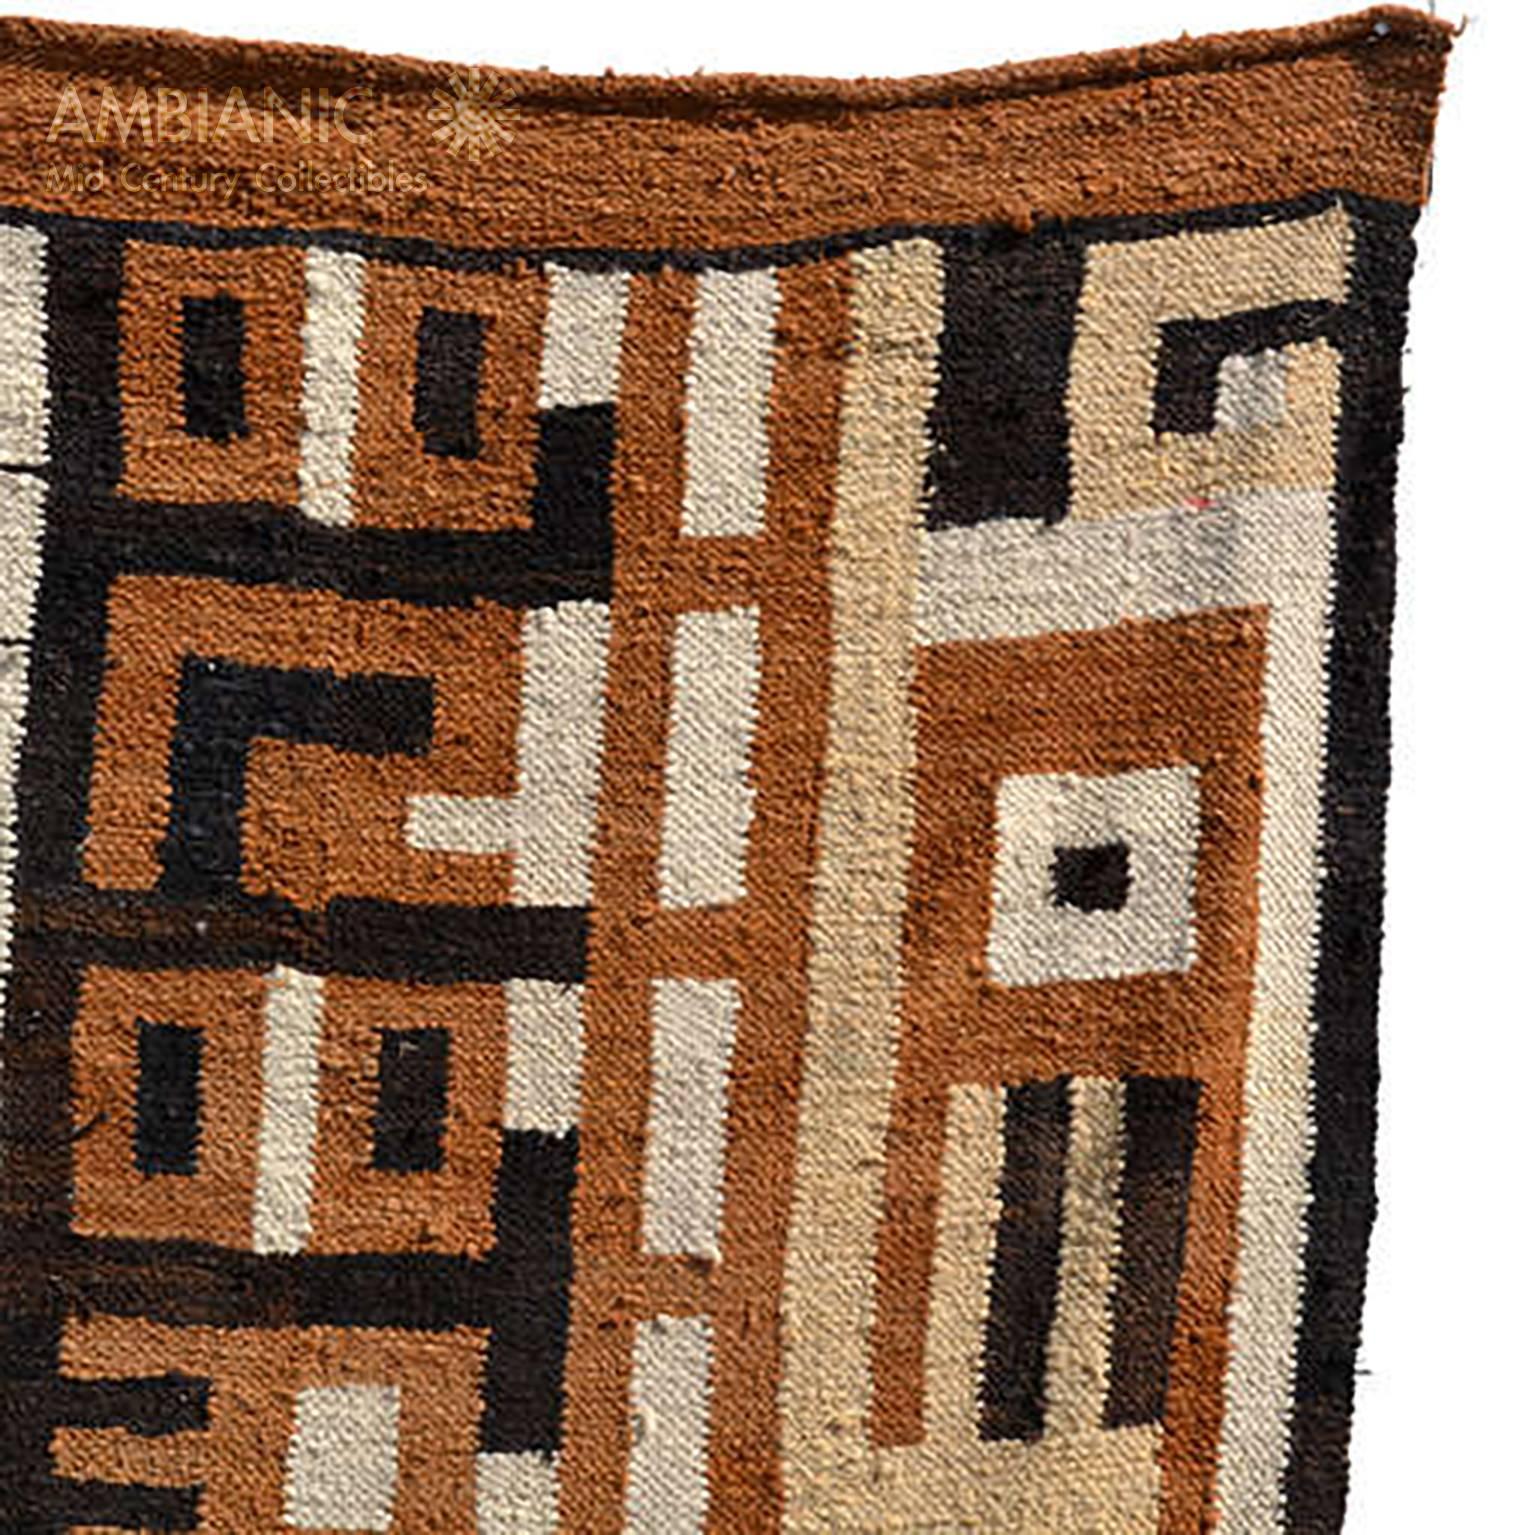 Beautiful vintage wool blanket with fantastic abstract graphics. Dominant colors are brown, black and two shades of beige tones. 

Original tag 